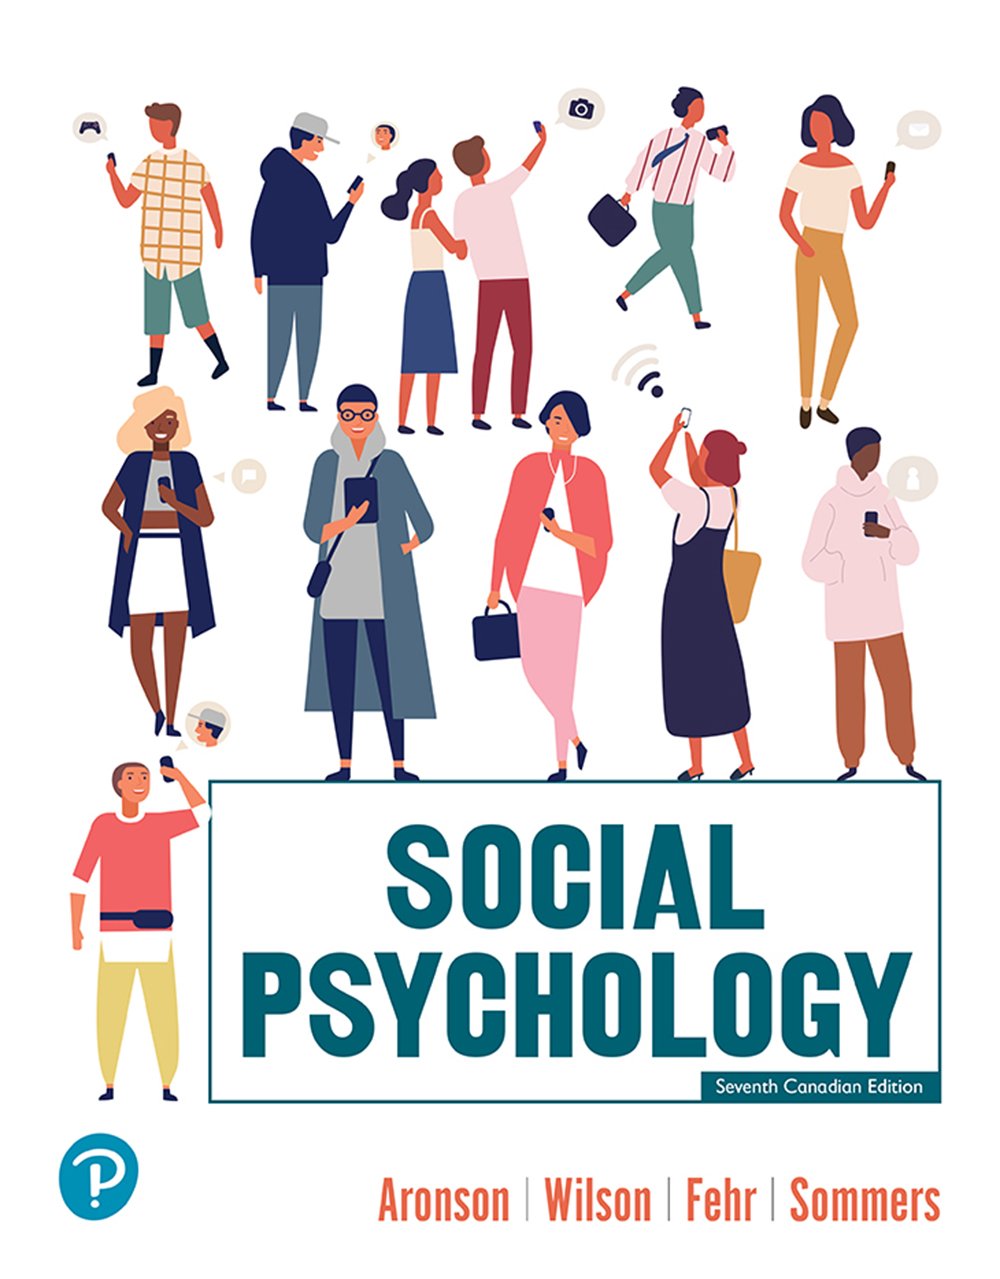 Social Psychology (Canadian Edition), 7th Edition (High Quality Image PDF)